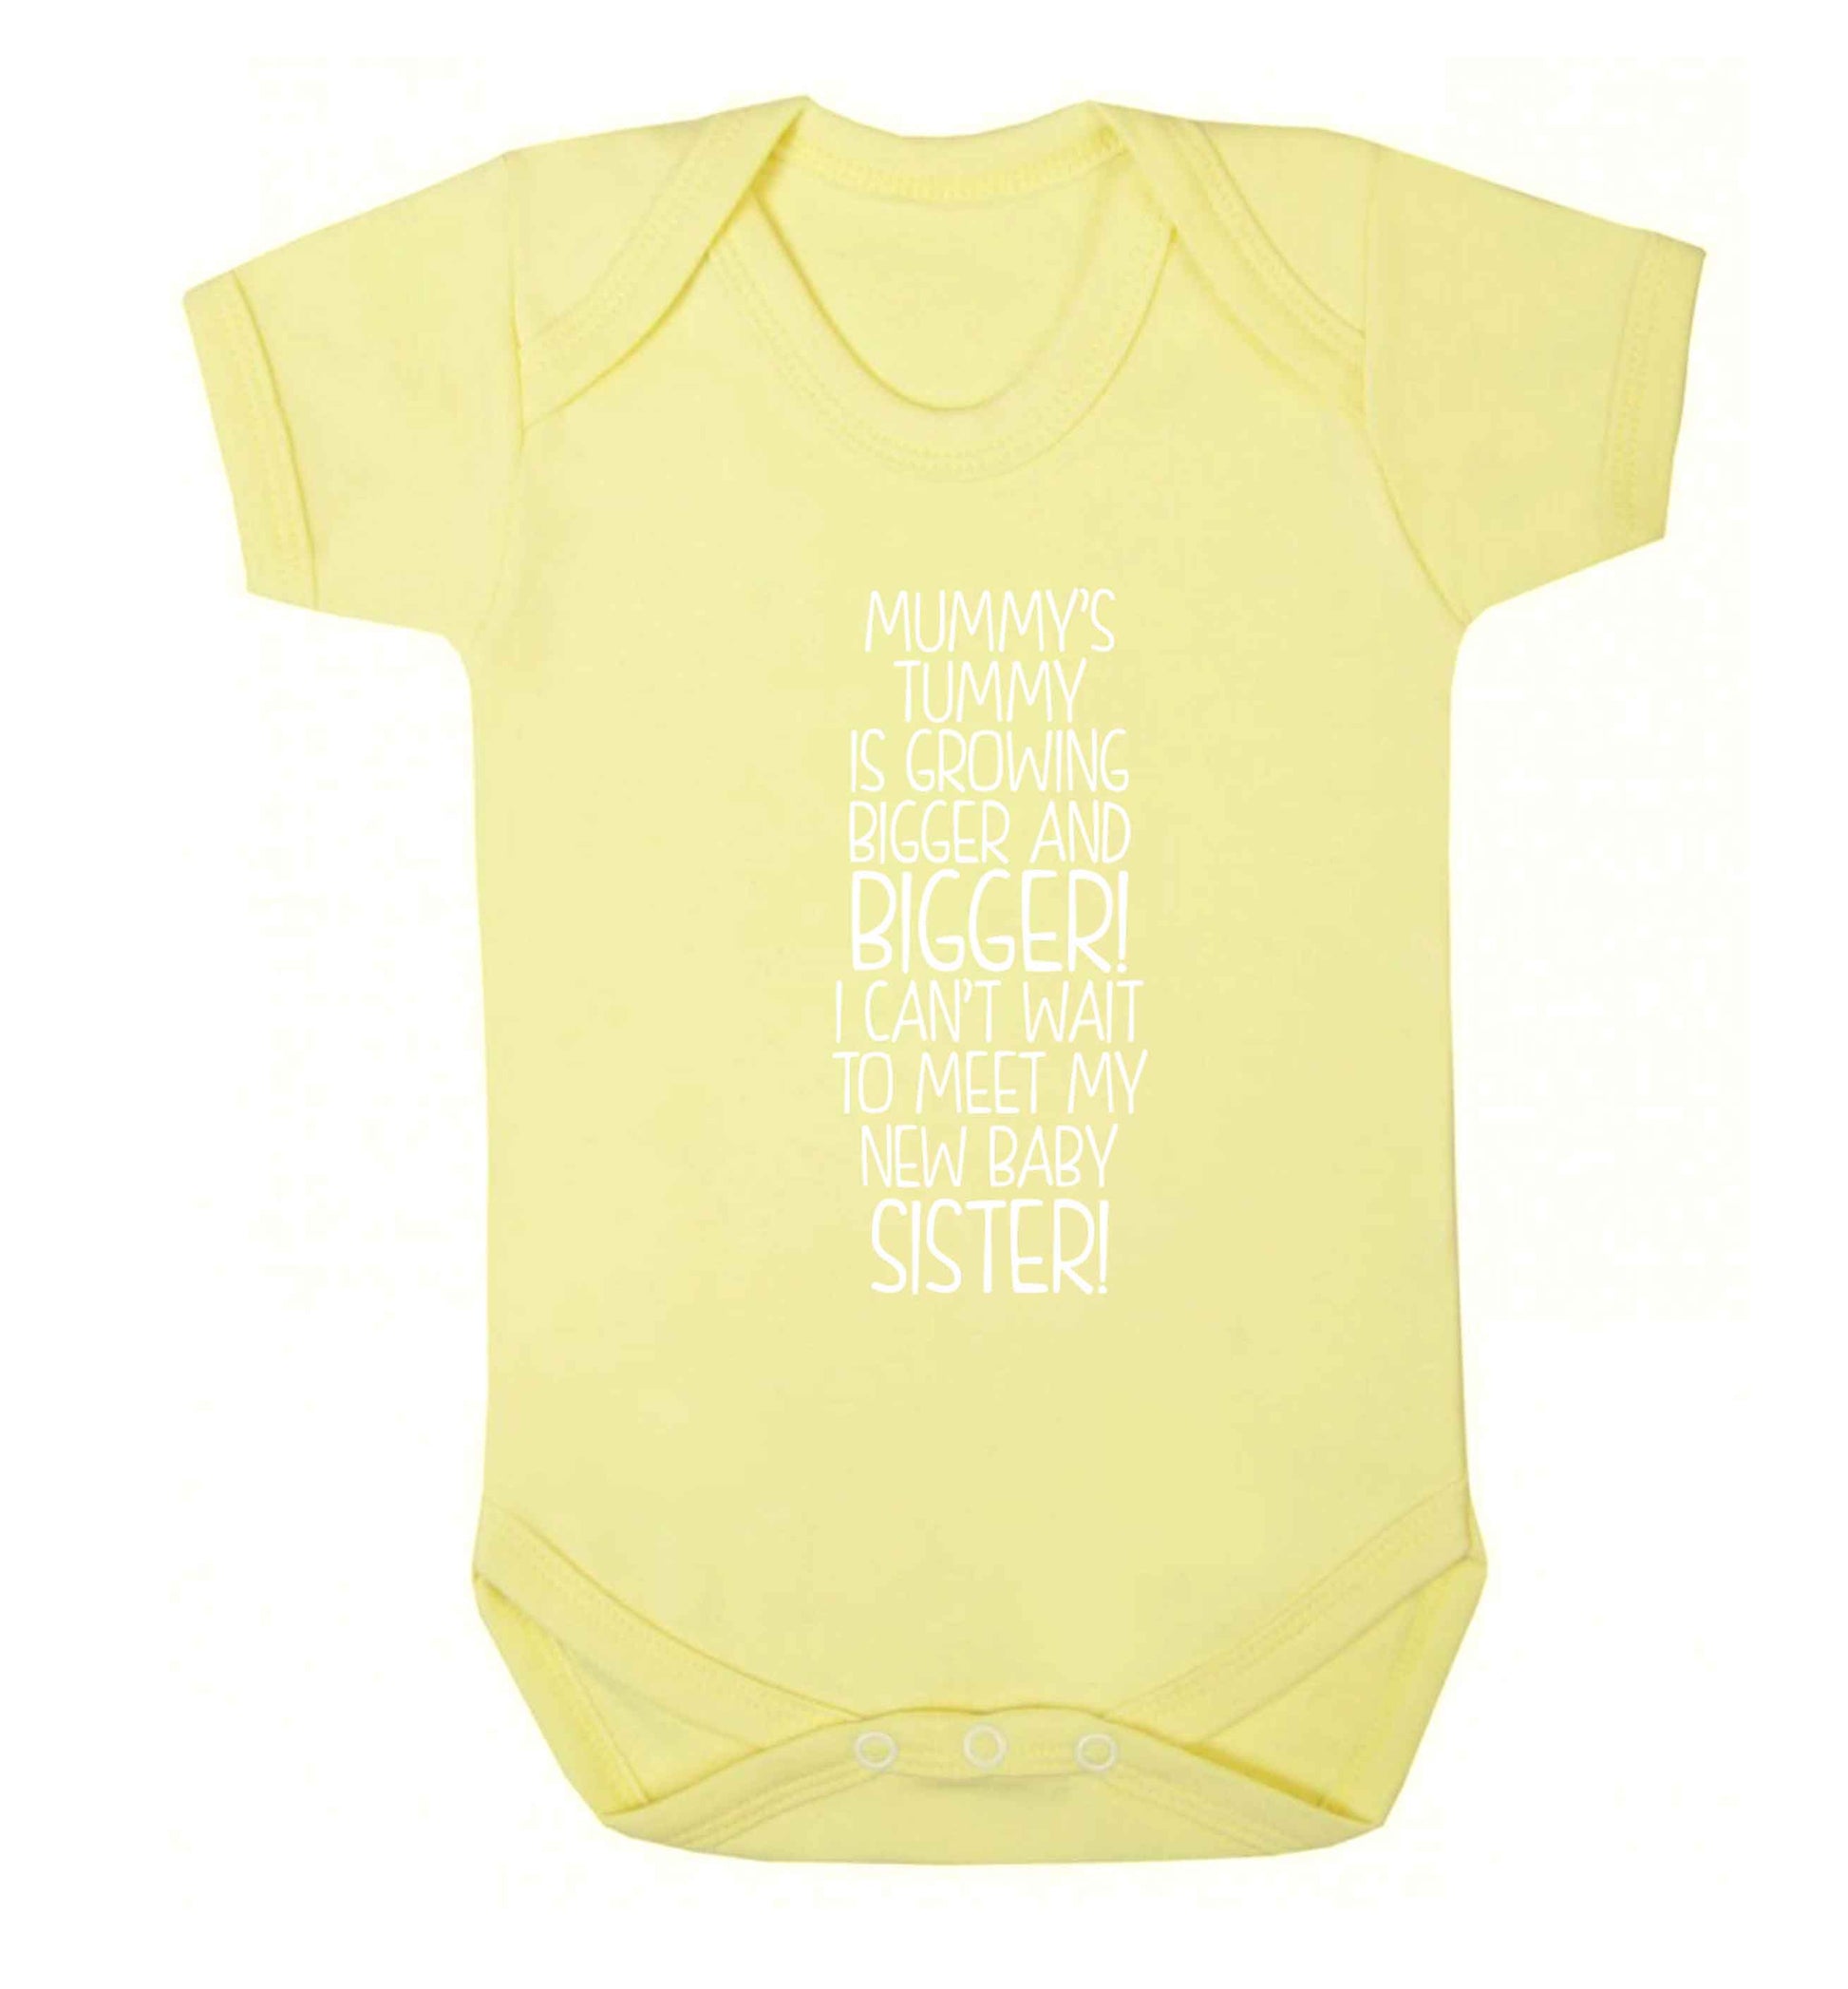 Mummy's tummy is growing bigger and bigger I can't wait to meet my new baby sister! Baby Vest pale yellow 18-24 months